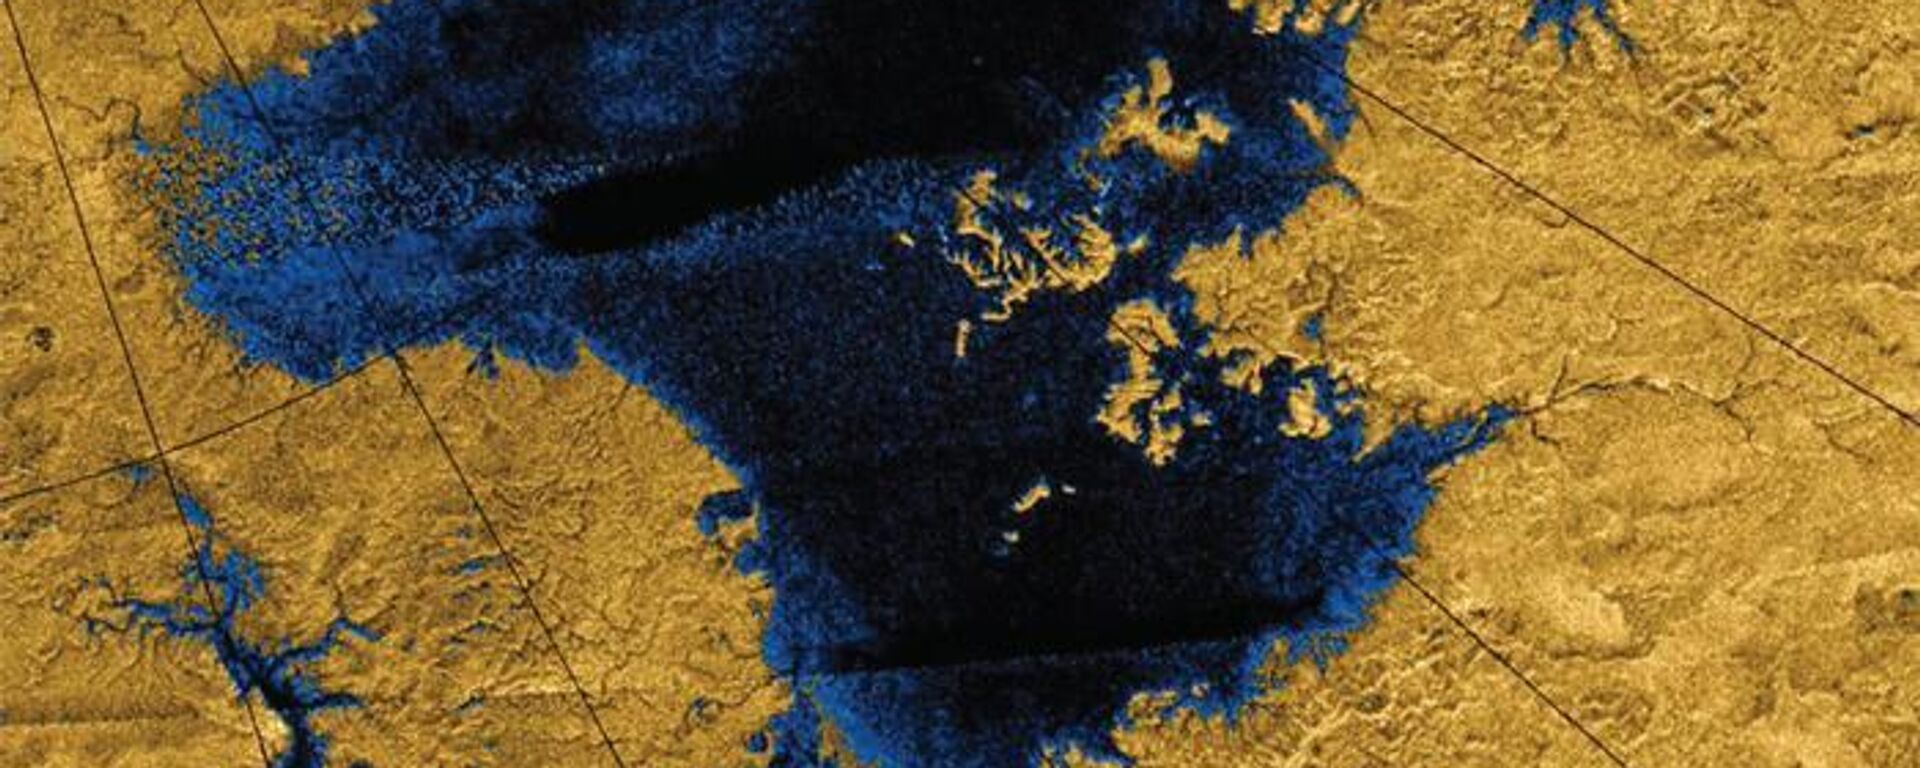 Images from the Cassini mission show river networks draining into lakes in Titan's north polar region. - Sputnik International, 1920, 11.07.2023